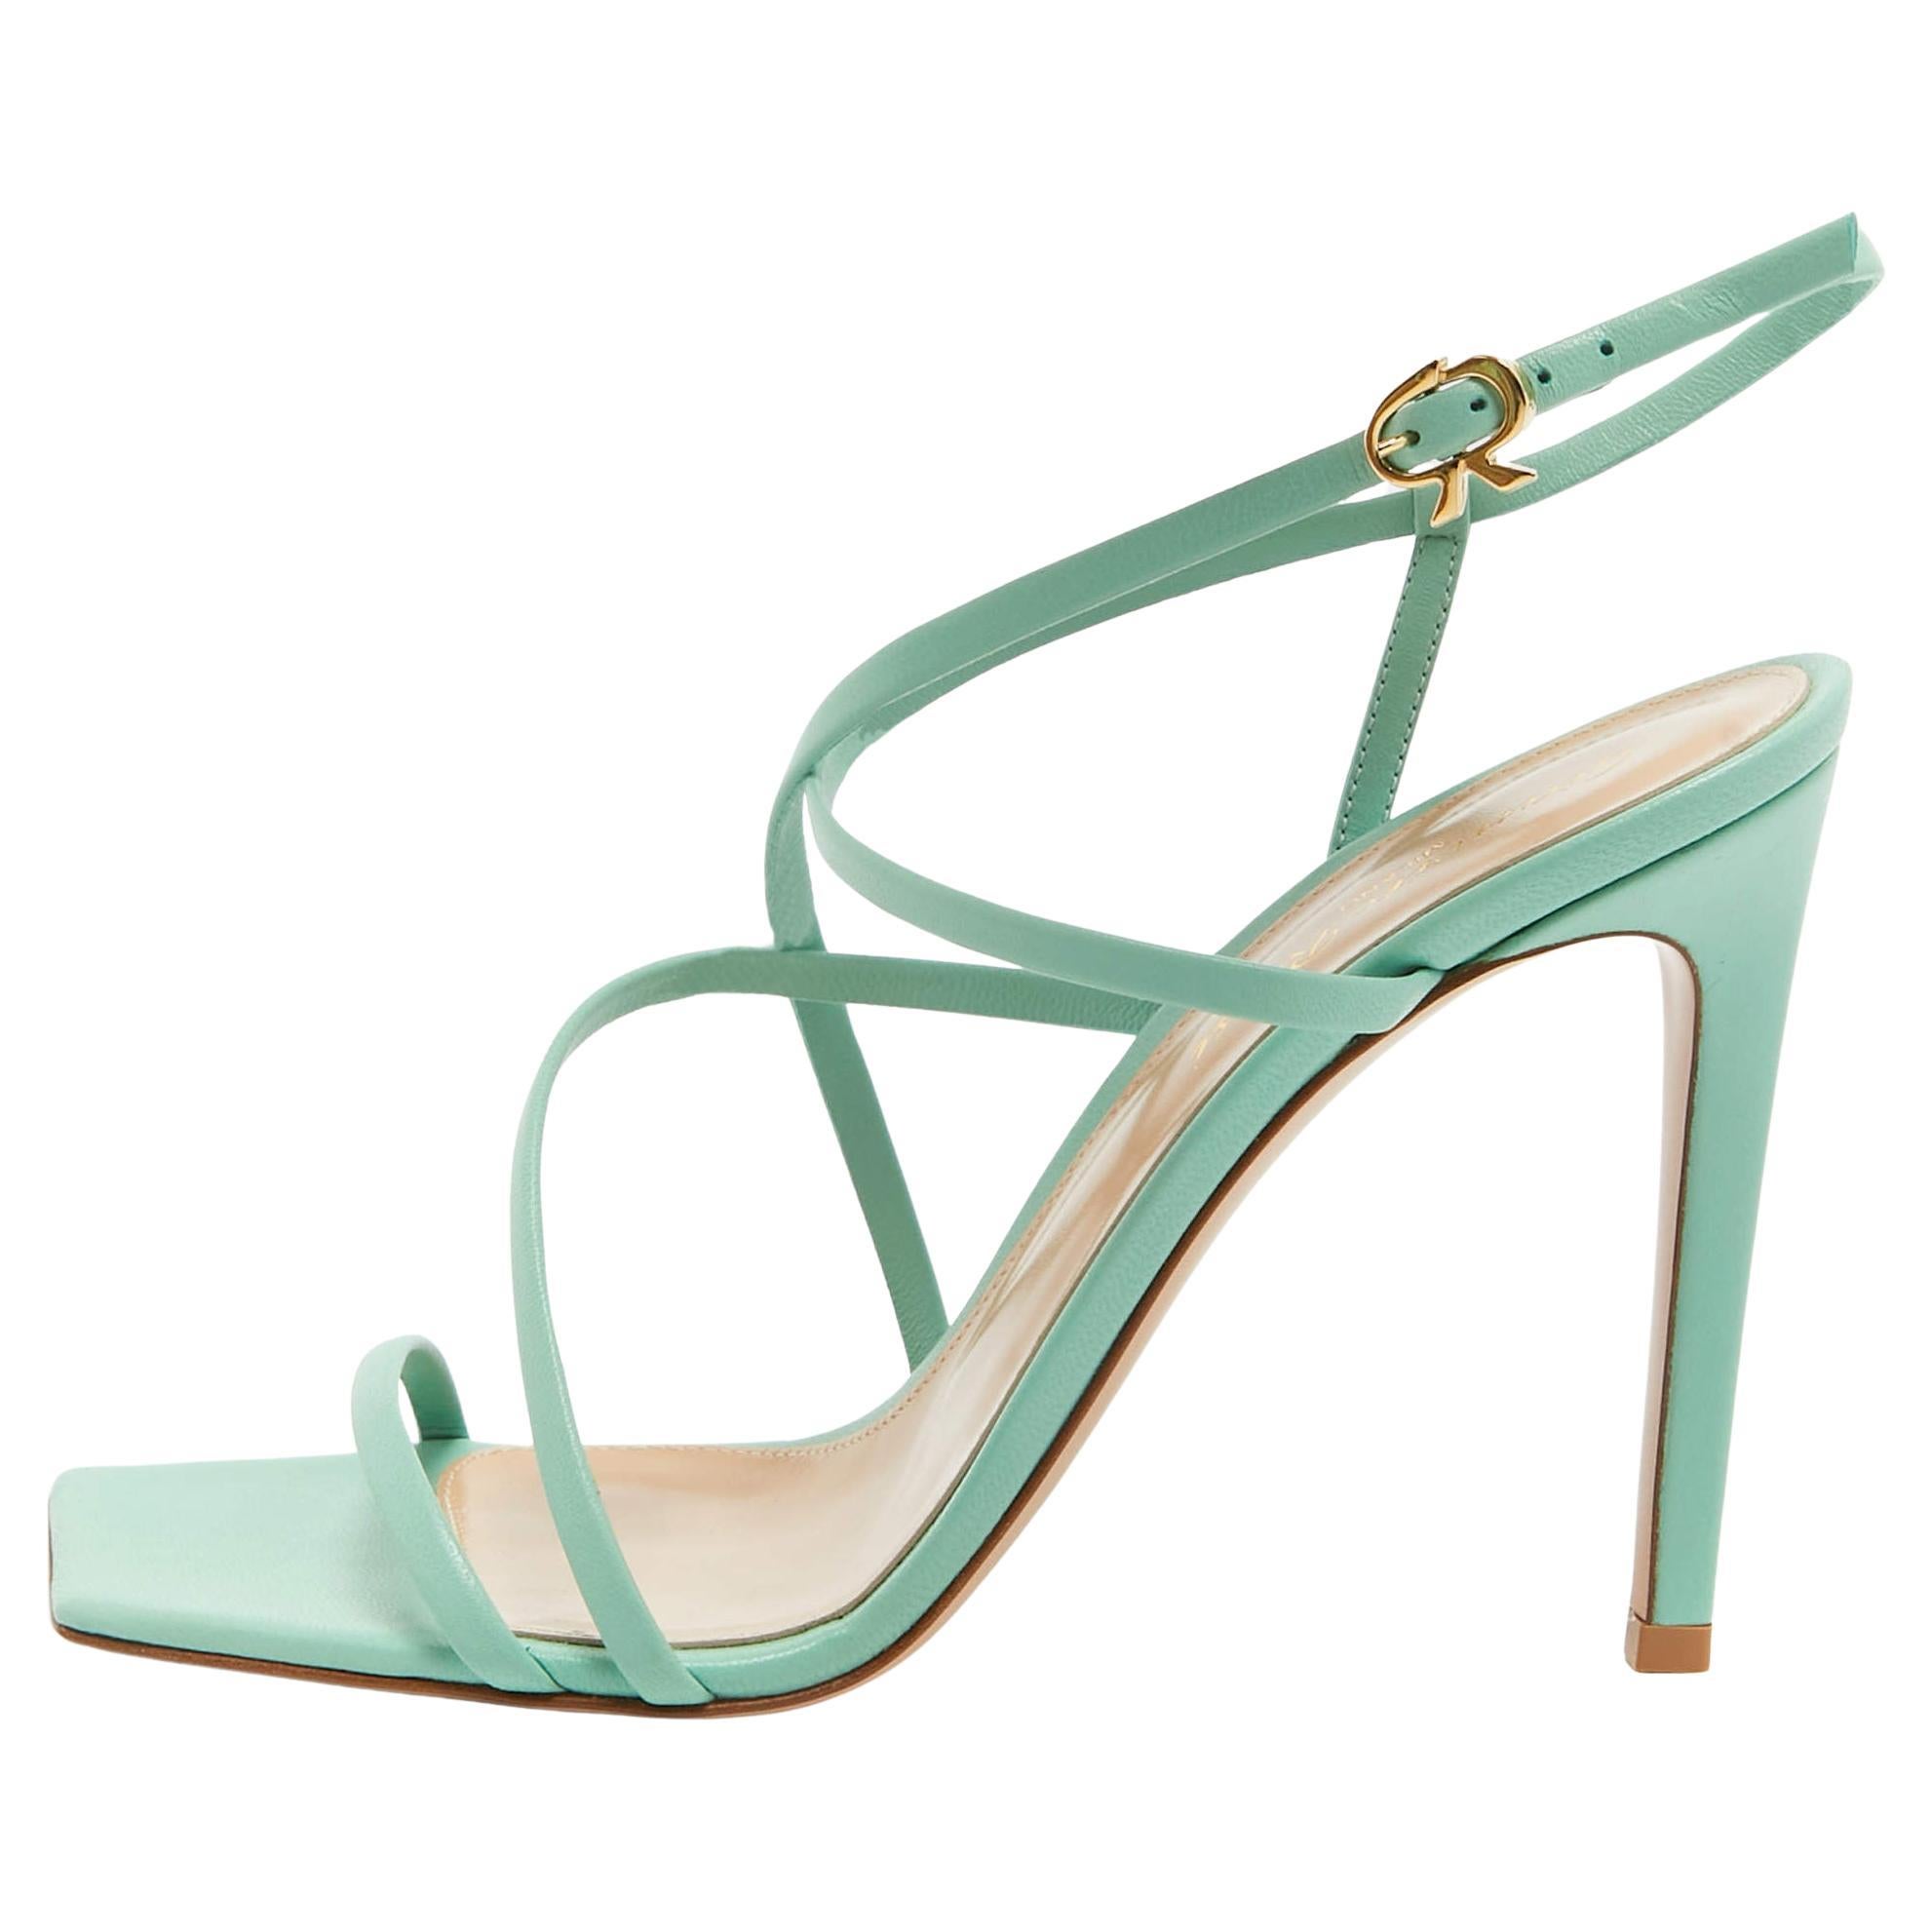 Gianvito Rossi Mint Green Leather Manilla Sandals Size 38.5 For Sale